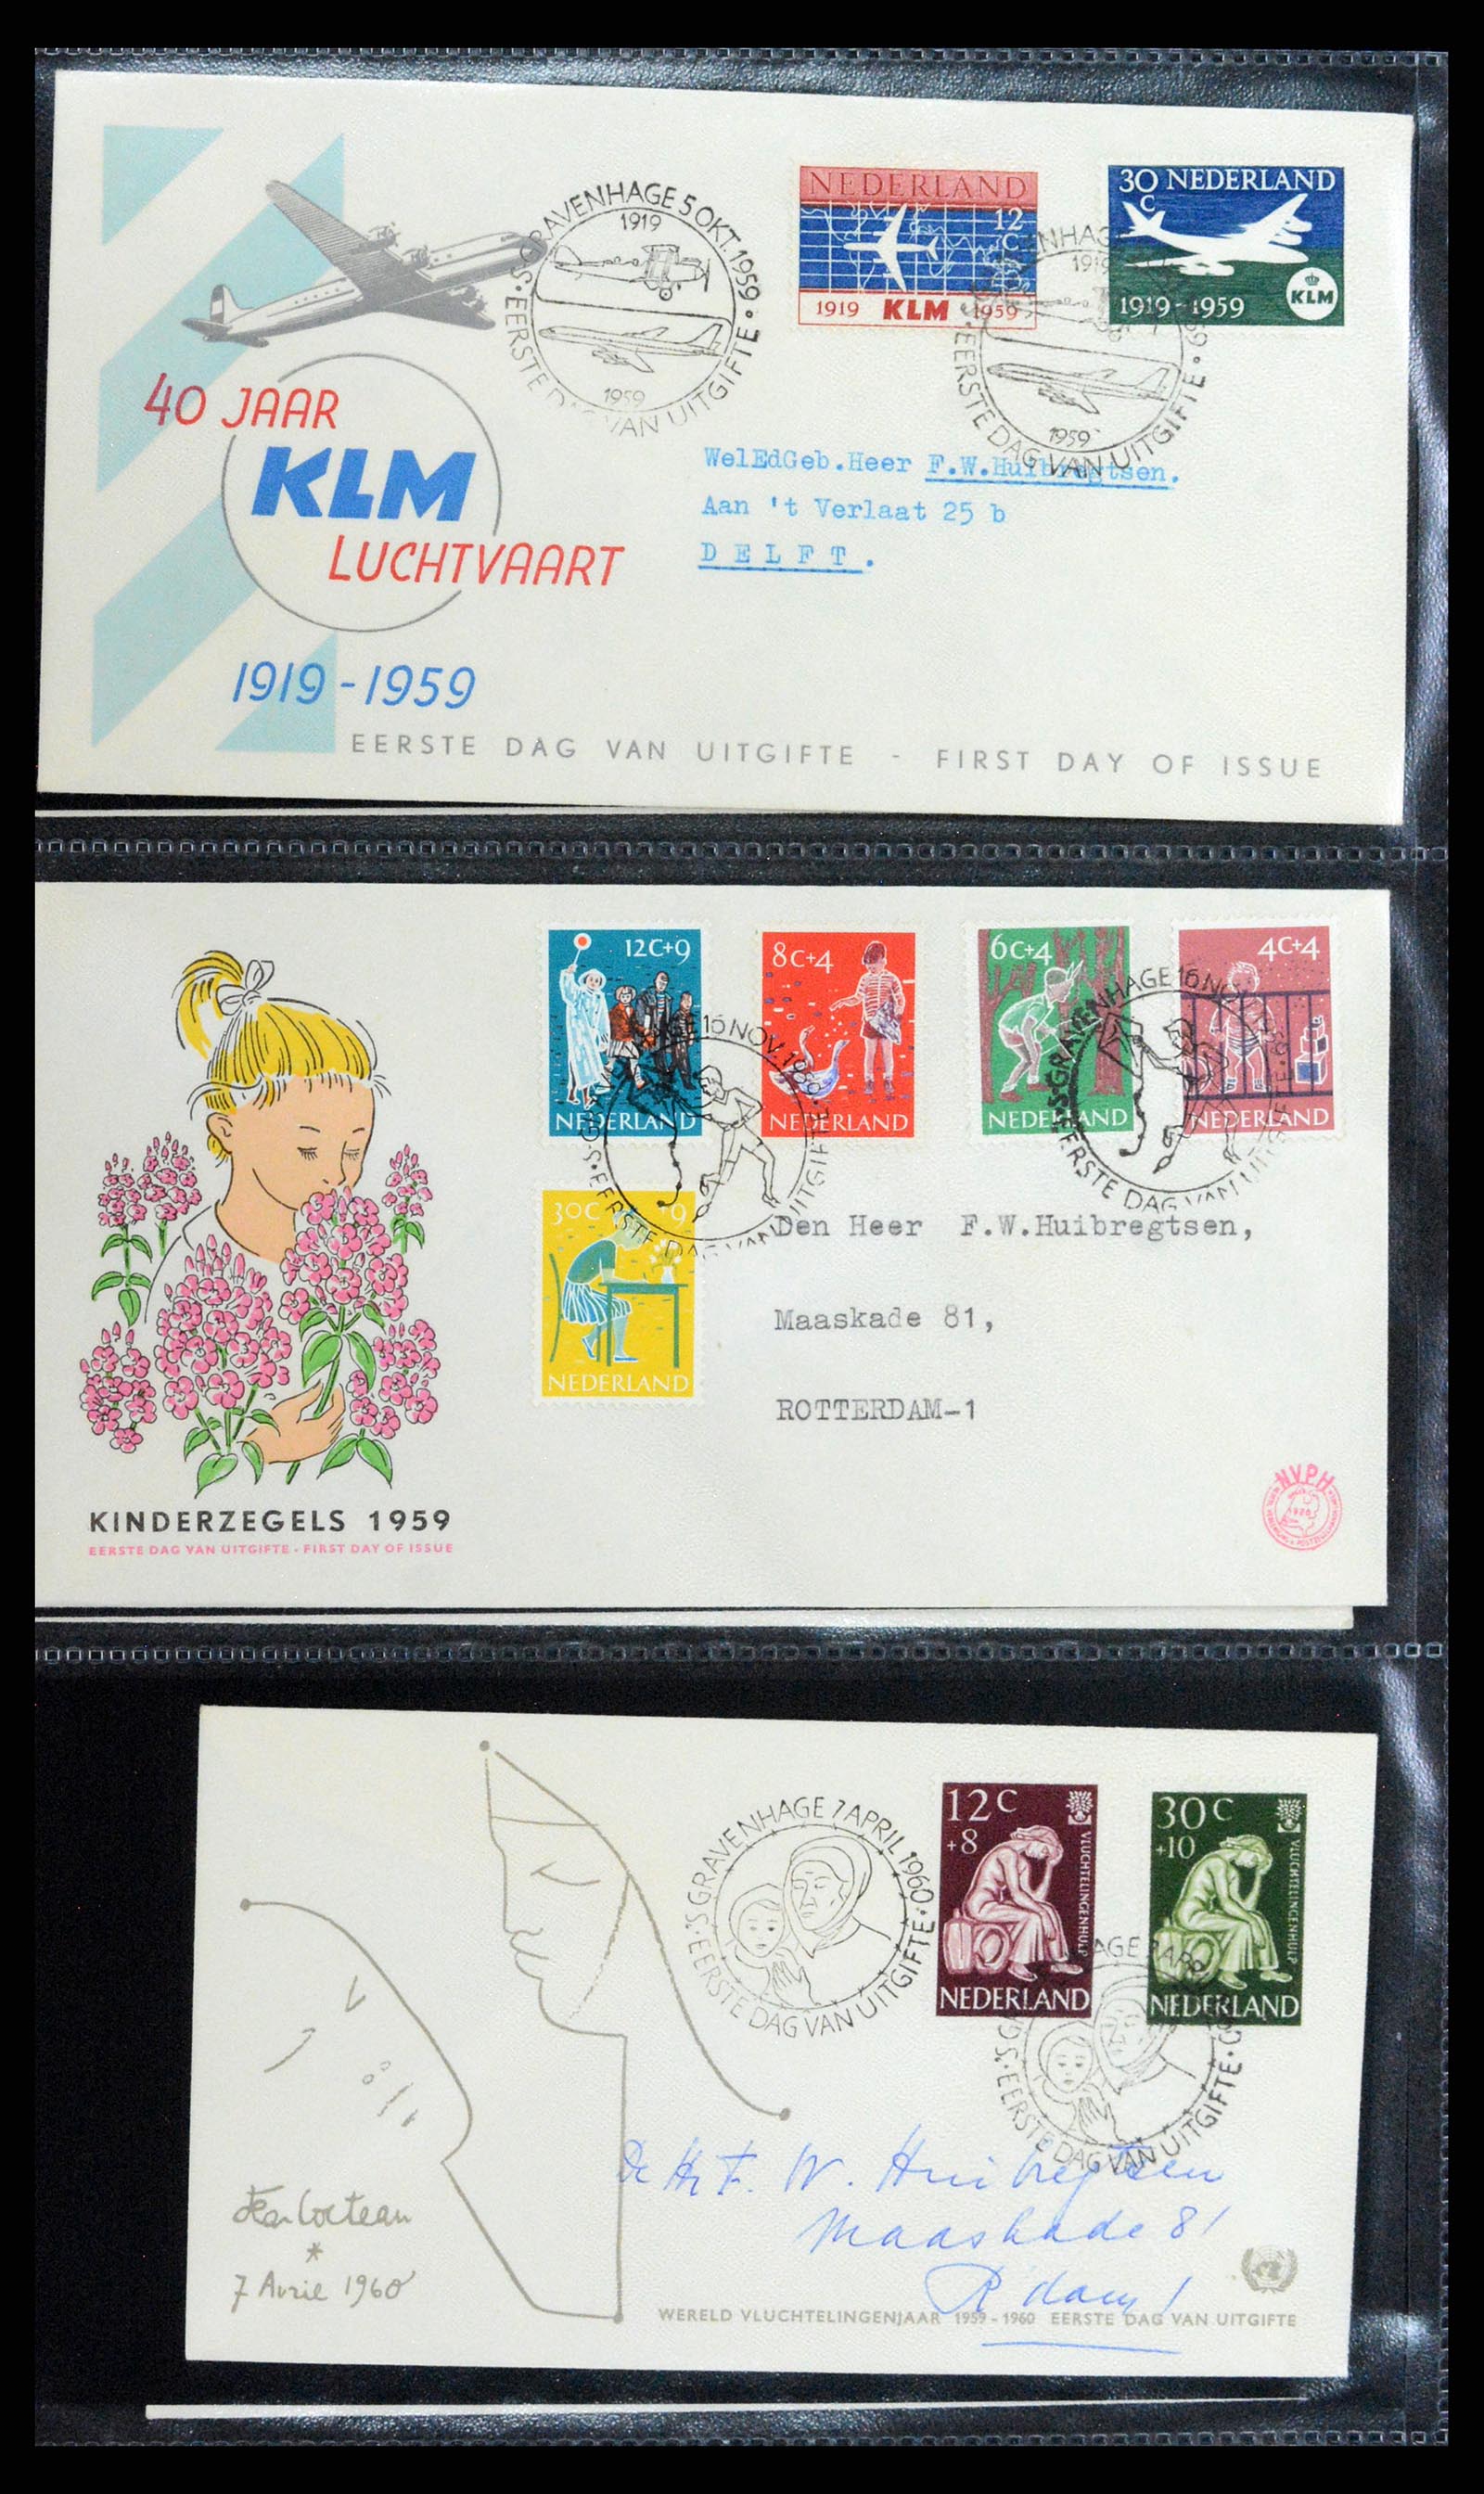 37710 016 - Stamp collection 37710 Netherlands FDC's 1949-1976.